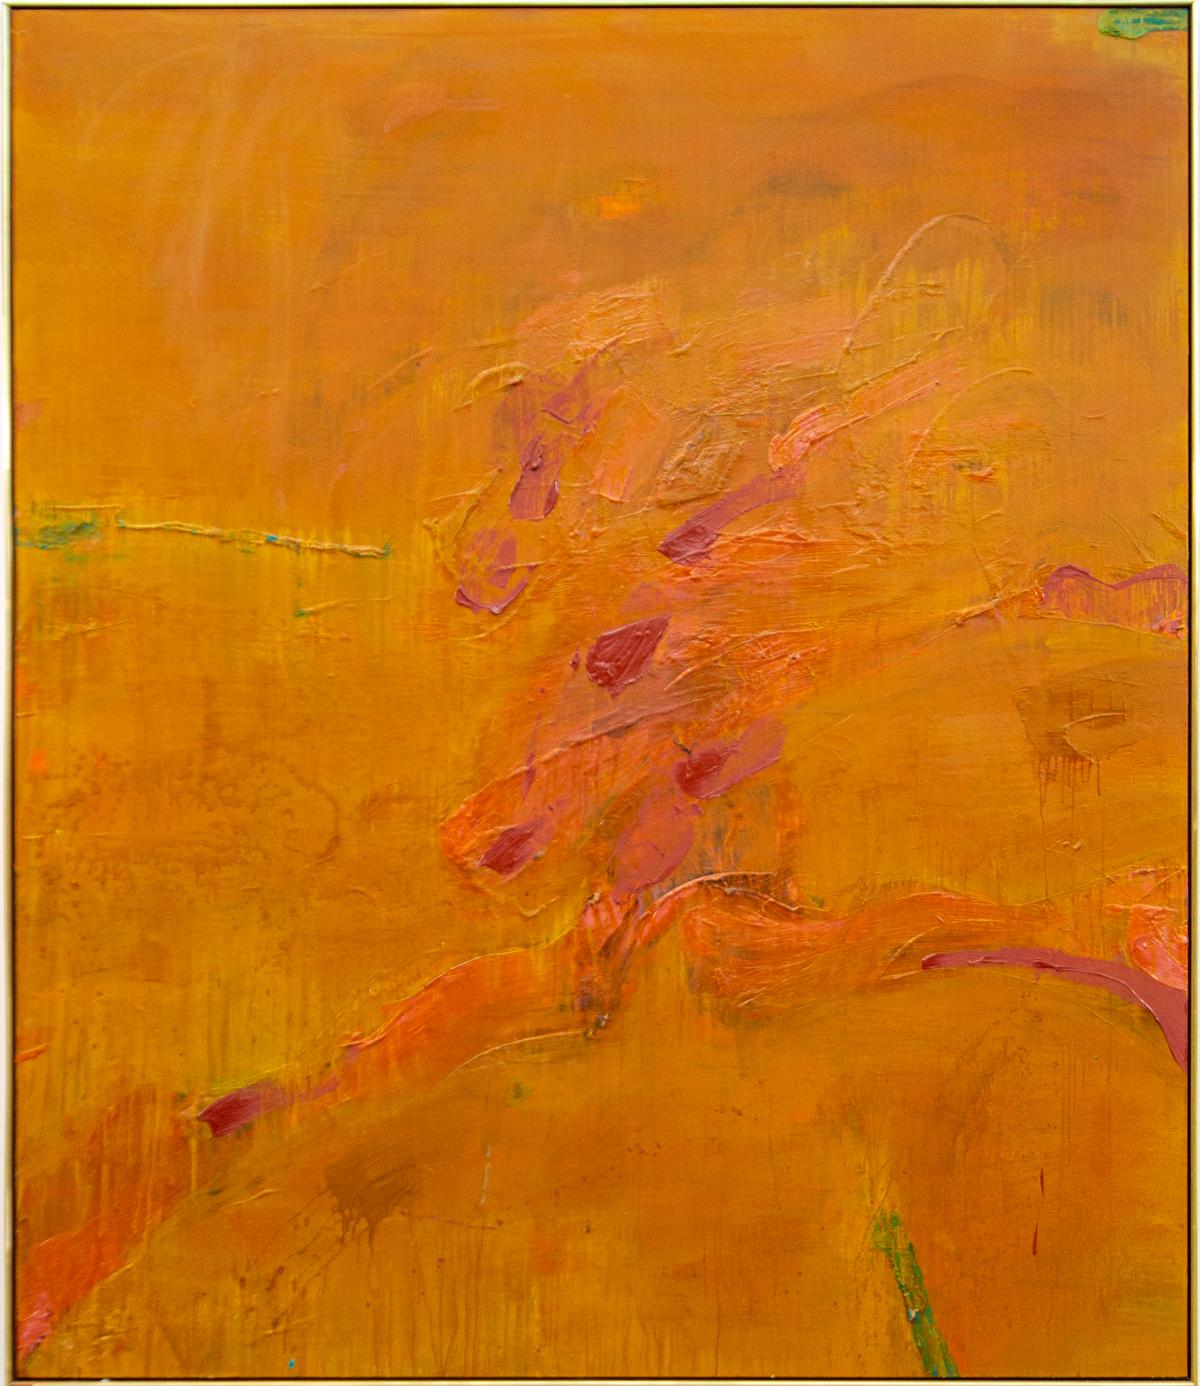 Rajasthan - large, bold, gestural abstract, expressionist, acrylic on canvas